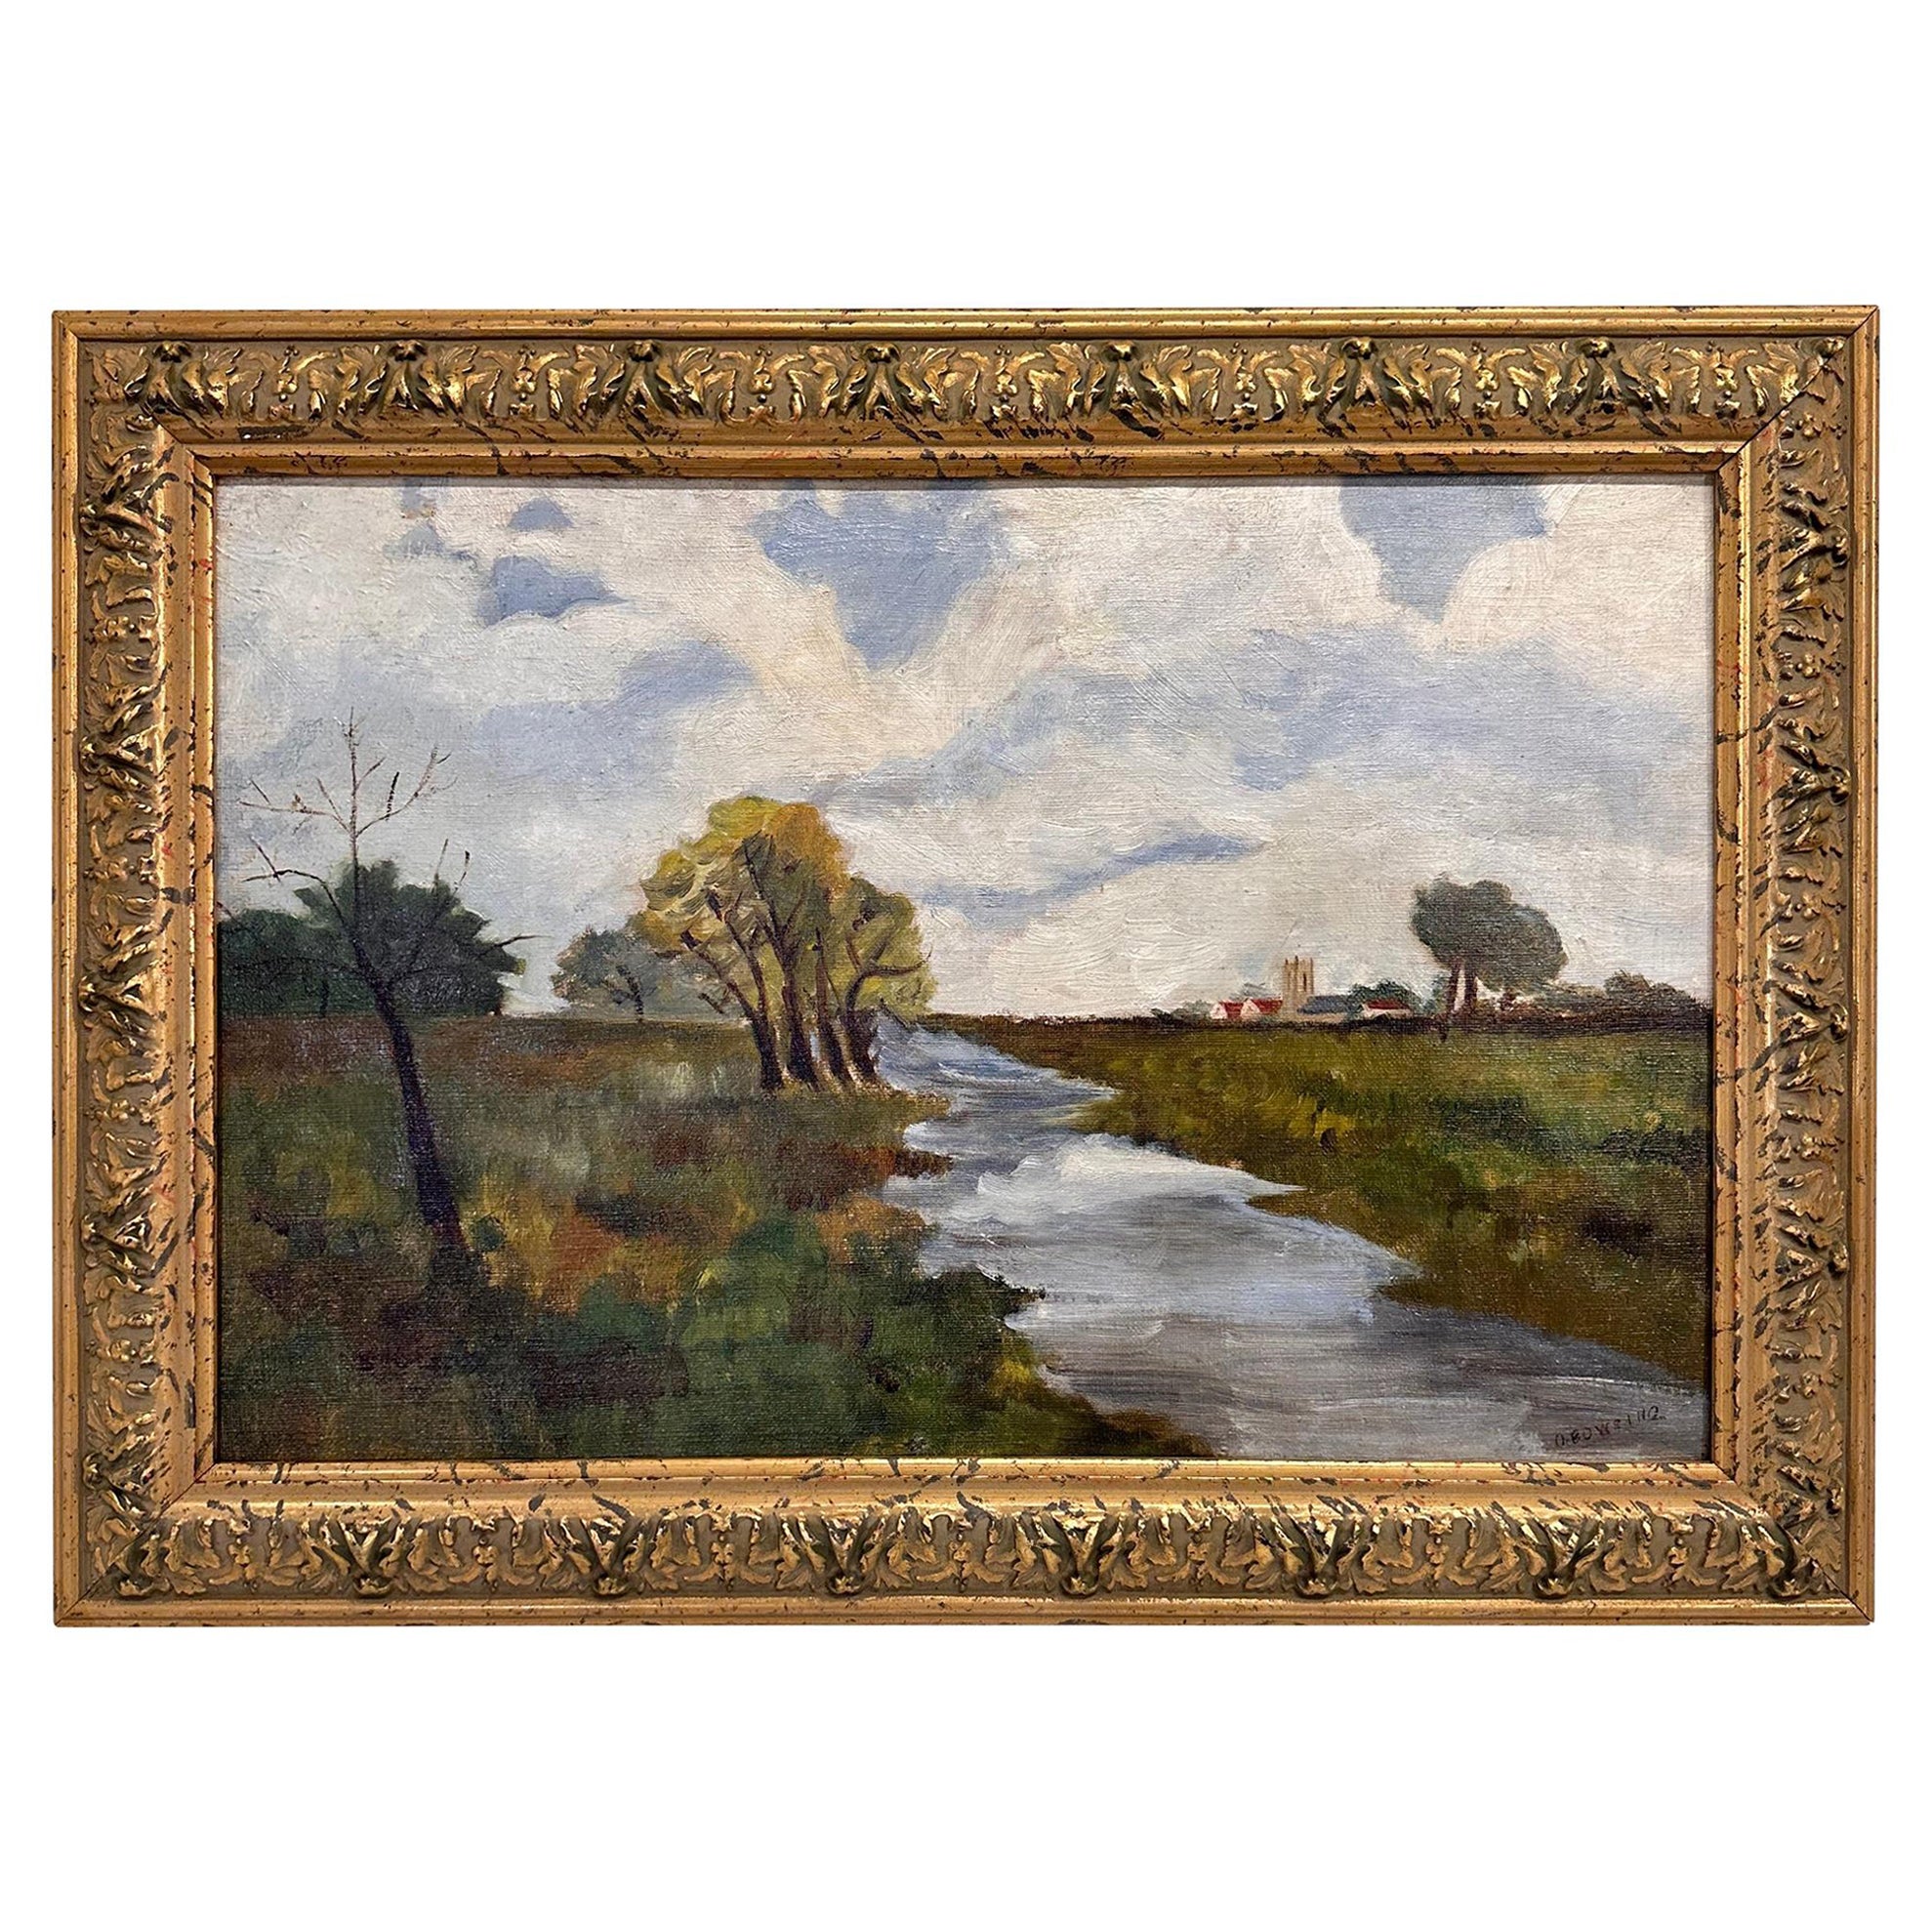 English Oil Painting